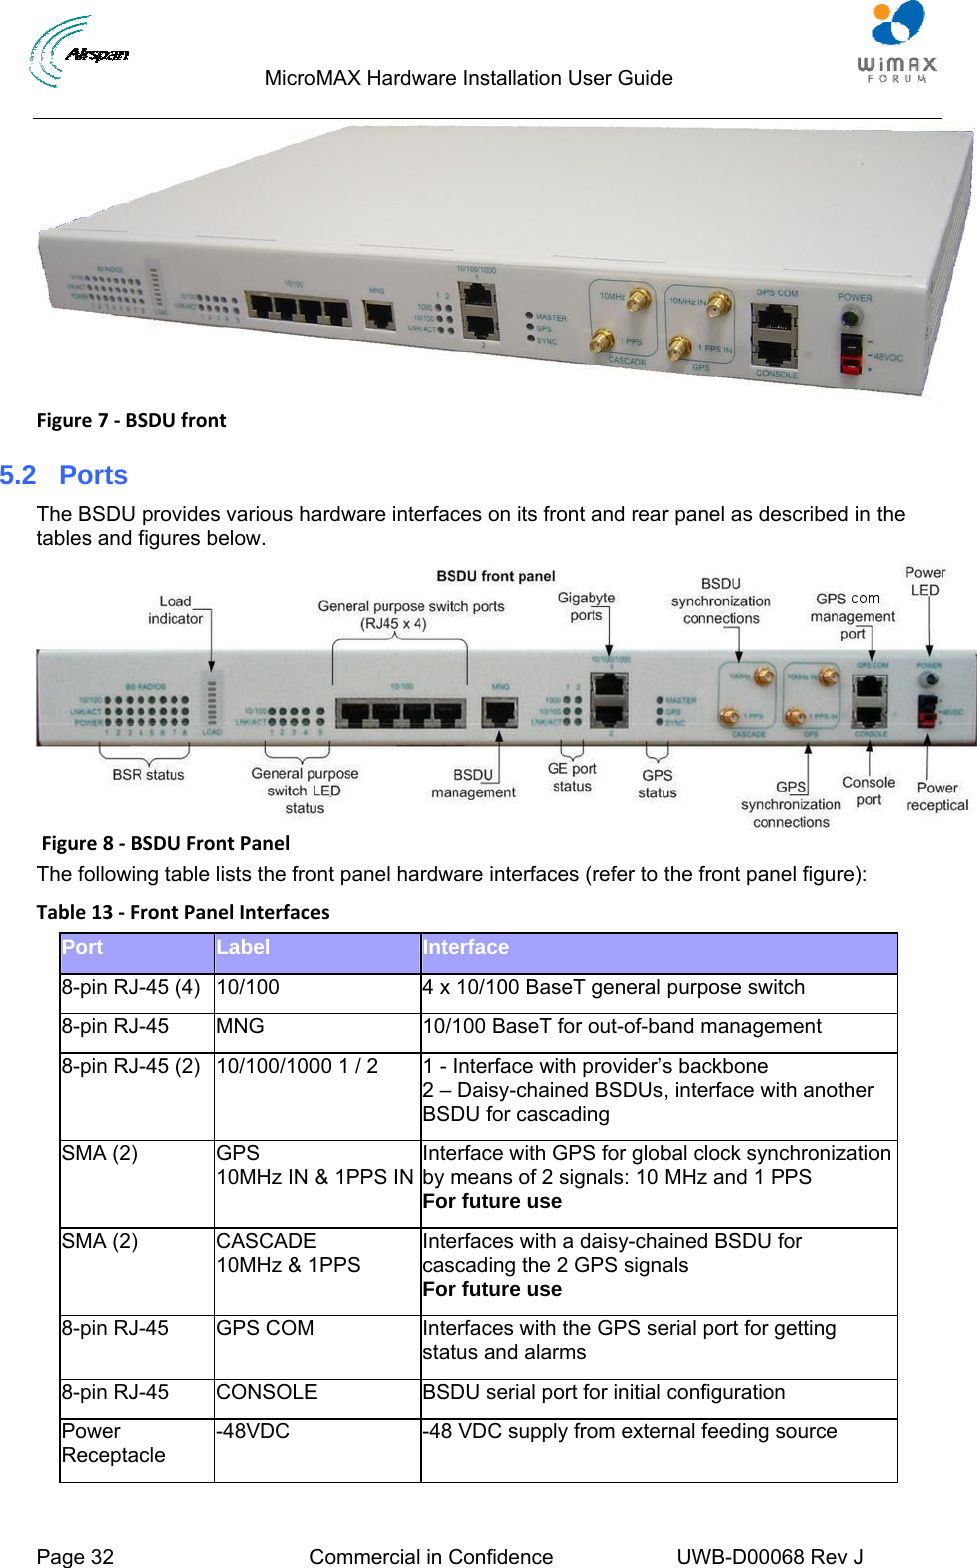                                  MicroMAX Hardware Installation User Guide  Page 32  Commercial in Confidence  UWB-D00068 Rev J    Figure7‐BSDUfront5.2  Ports The BSDU provides various hardware interfaces on its front and rear panel as described in the tables and figures below. Figure8‐BSDUFrontPanelThe following table lists the front panel hardware interfaces (refer to the front panel figure): Table13‐FrontPanelInterfacesPort  Label  Interface 8-pin RJ-45 (4)  10/100  4 x 10/100 BaseT general purpose switch 8-pin RJ-45  MNG  10/100 BaseT for out-of-band management 8-pin RJ-45 (2)  10/100/1000 1 / 2  1 - Interface with provider’s backbone  2 – Daisy-chained BSDUs, interface with another BSDU for cascading SMA (2)  GPS 10MHz IN &amp; 1PPS INInterface with GPS for global clock synchronization by means of 2 signals: 10 MHz and 1 PPS For future use SMA (2)  CASCADE 10MHz &amp; 1PPS Interfaces with a daisy-chained BSDU for cascading the 2 GPS signals For future use 8-pin RJ-45  GPS COM  Interfaces with the GPS serial port for getting status and alarms 8-pin RJ-45  CONSOLE  BSDU serial port for initial configuration Power Receptacle -48VDC  -48 VDC supply from external feeding source  